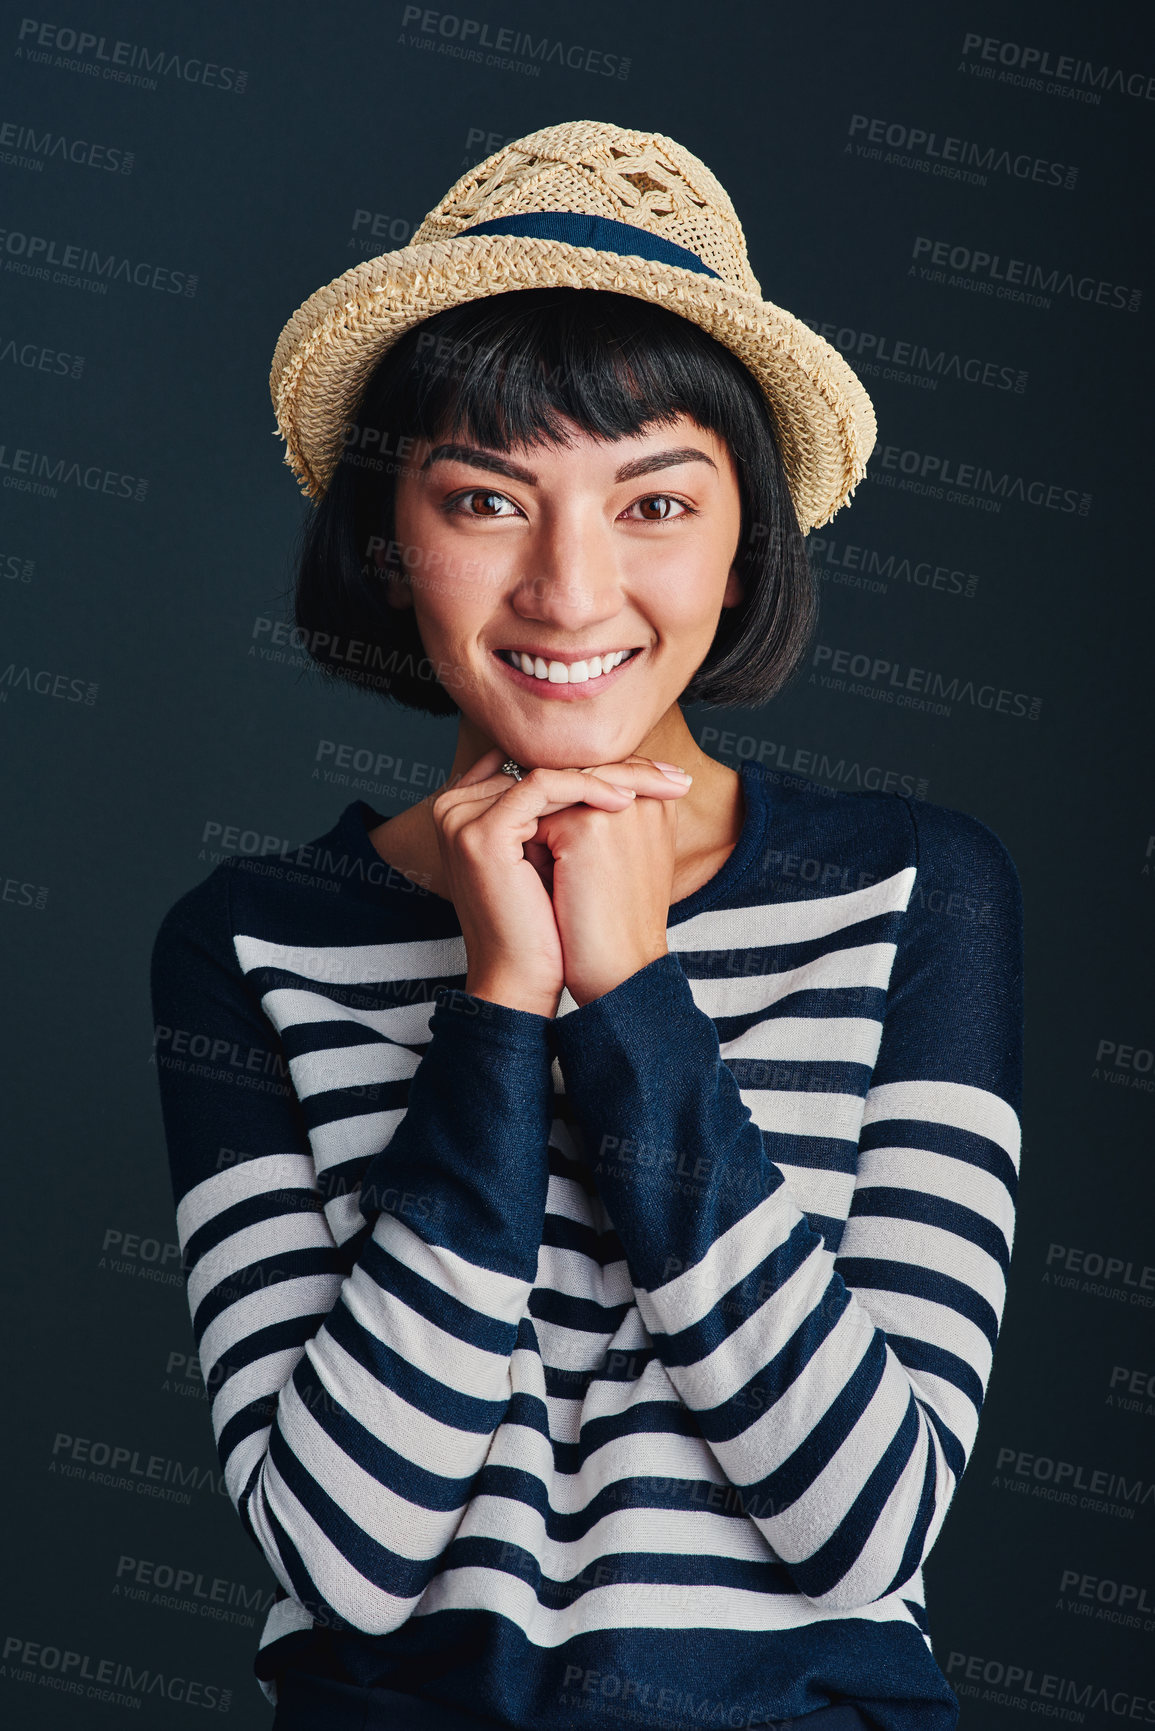 Buy stock photo Studio shot of an attractive young woman against a dark background